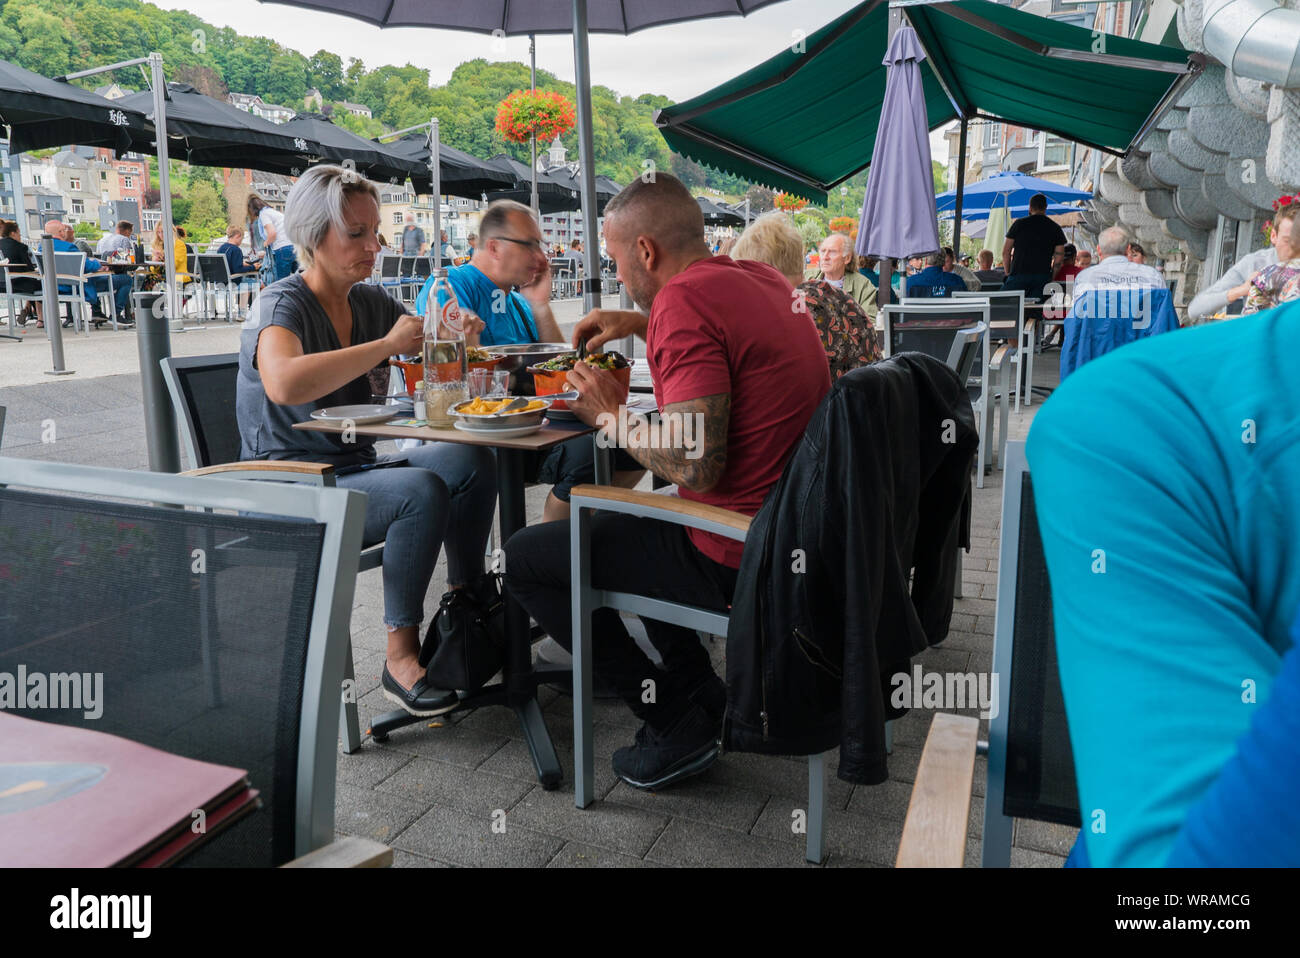 Dinant, Namur / Belgium - 11 August 2019: people dining out and eating traditional mussel and french fries dish 'Moules et Frites' in Dinant Stock Photo